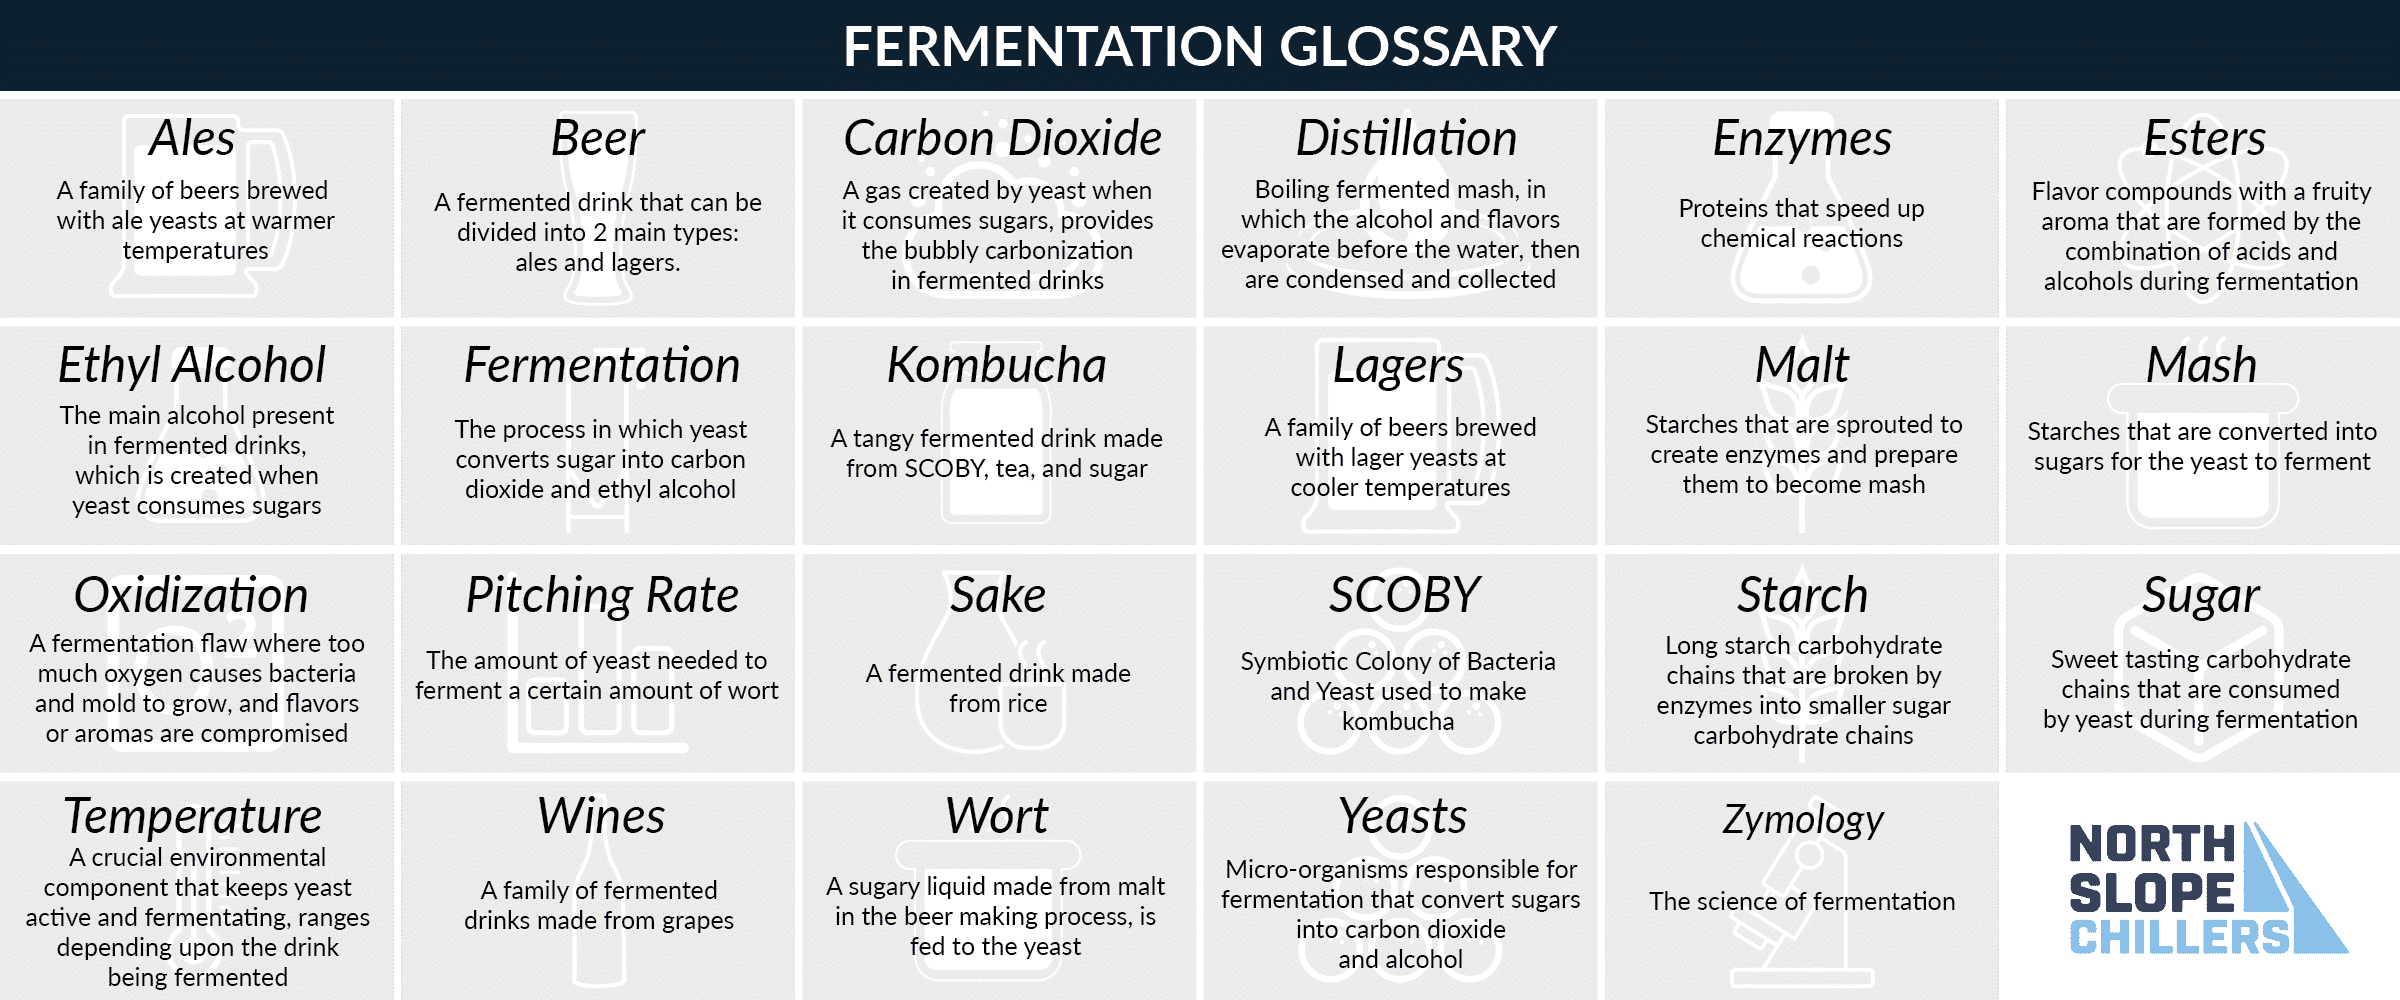 North Slope Chillers infographic of a fermentation glossary with common fermentation terms and their meanings